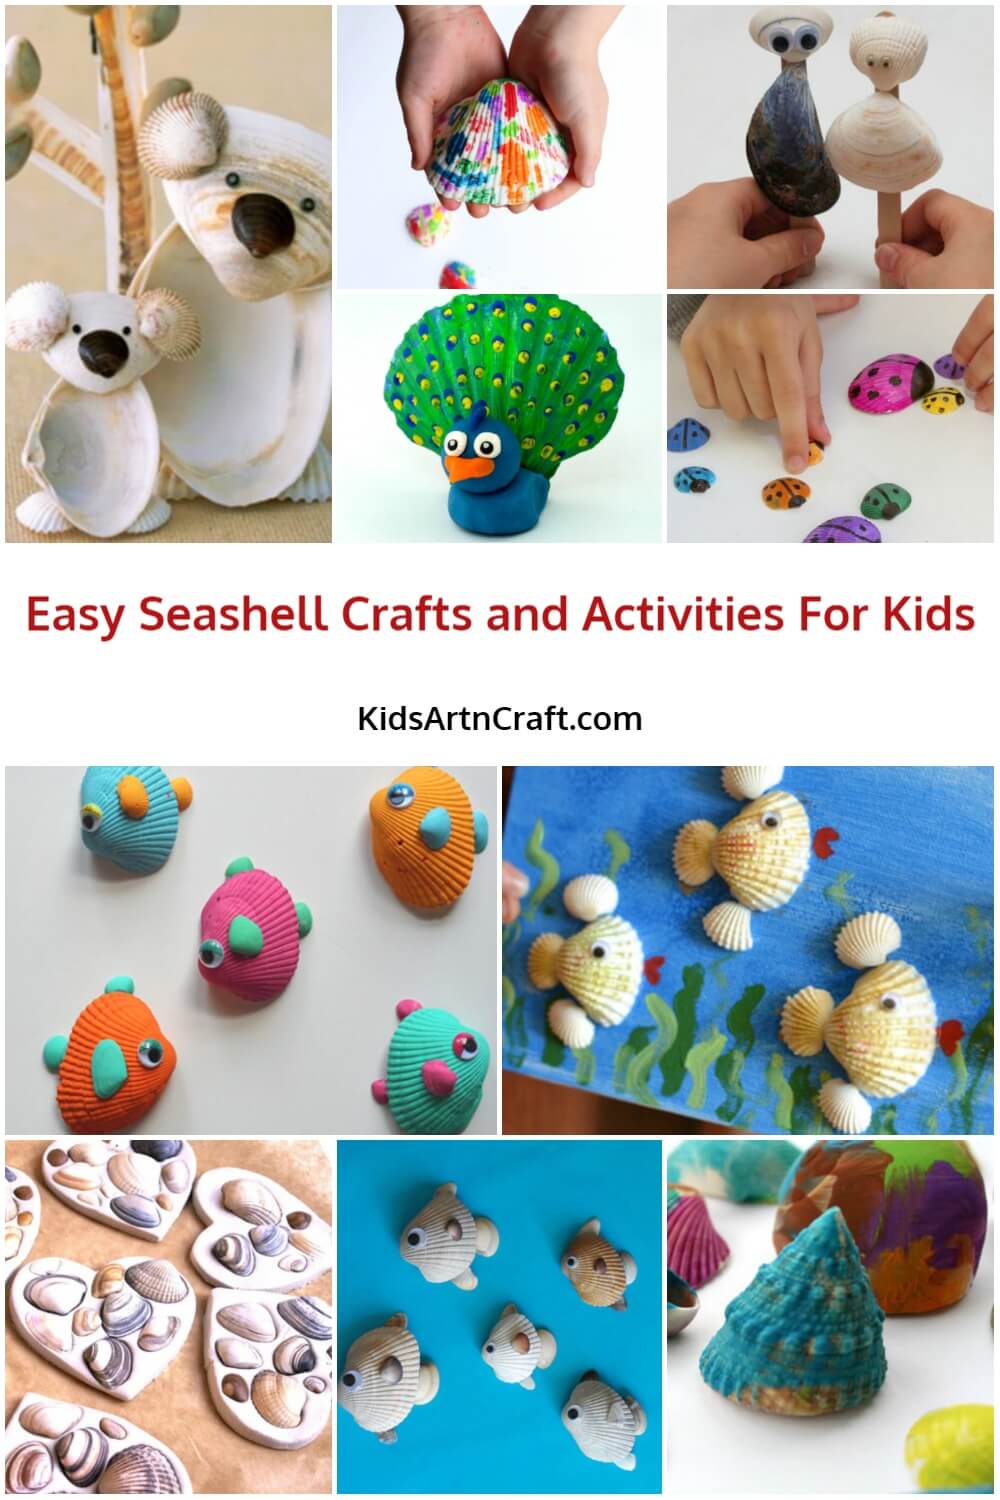  Easy Seashell Crafts and Activities For Kids